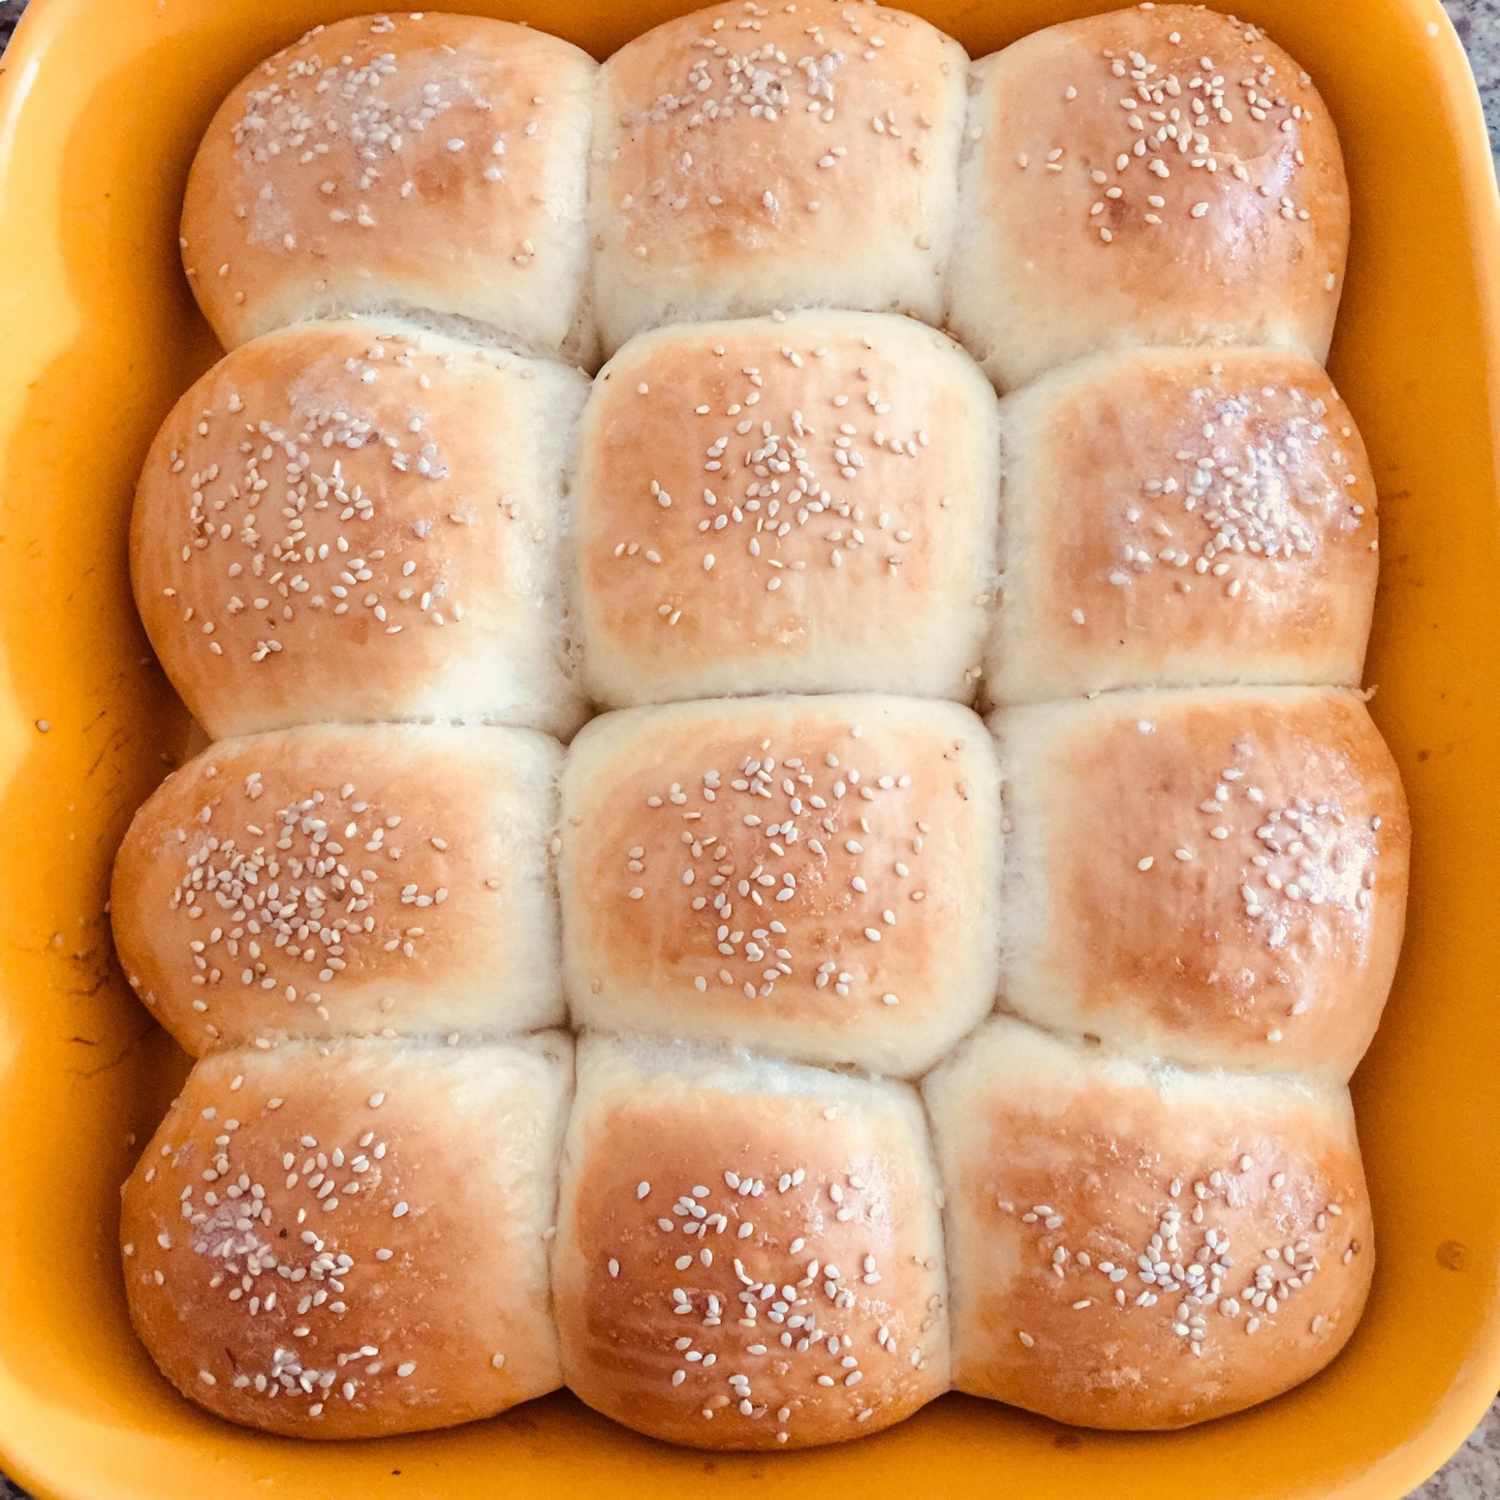  11 Bread Recipes You Can Make in Your 9x13 Baking Dish 